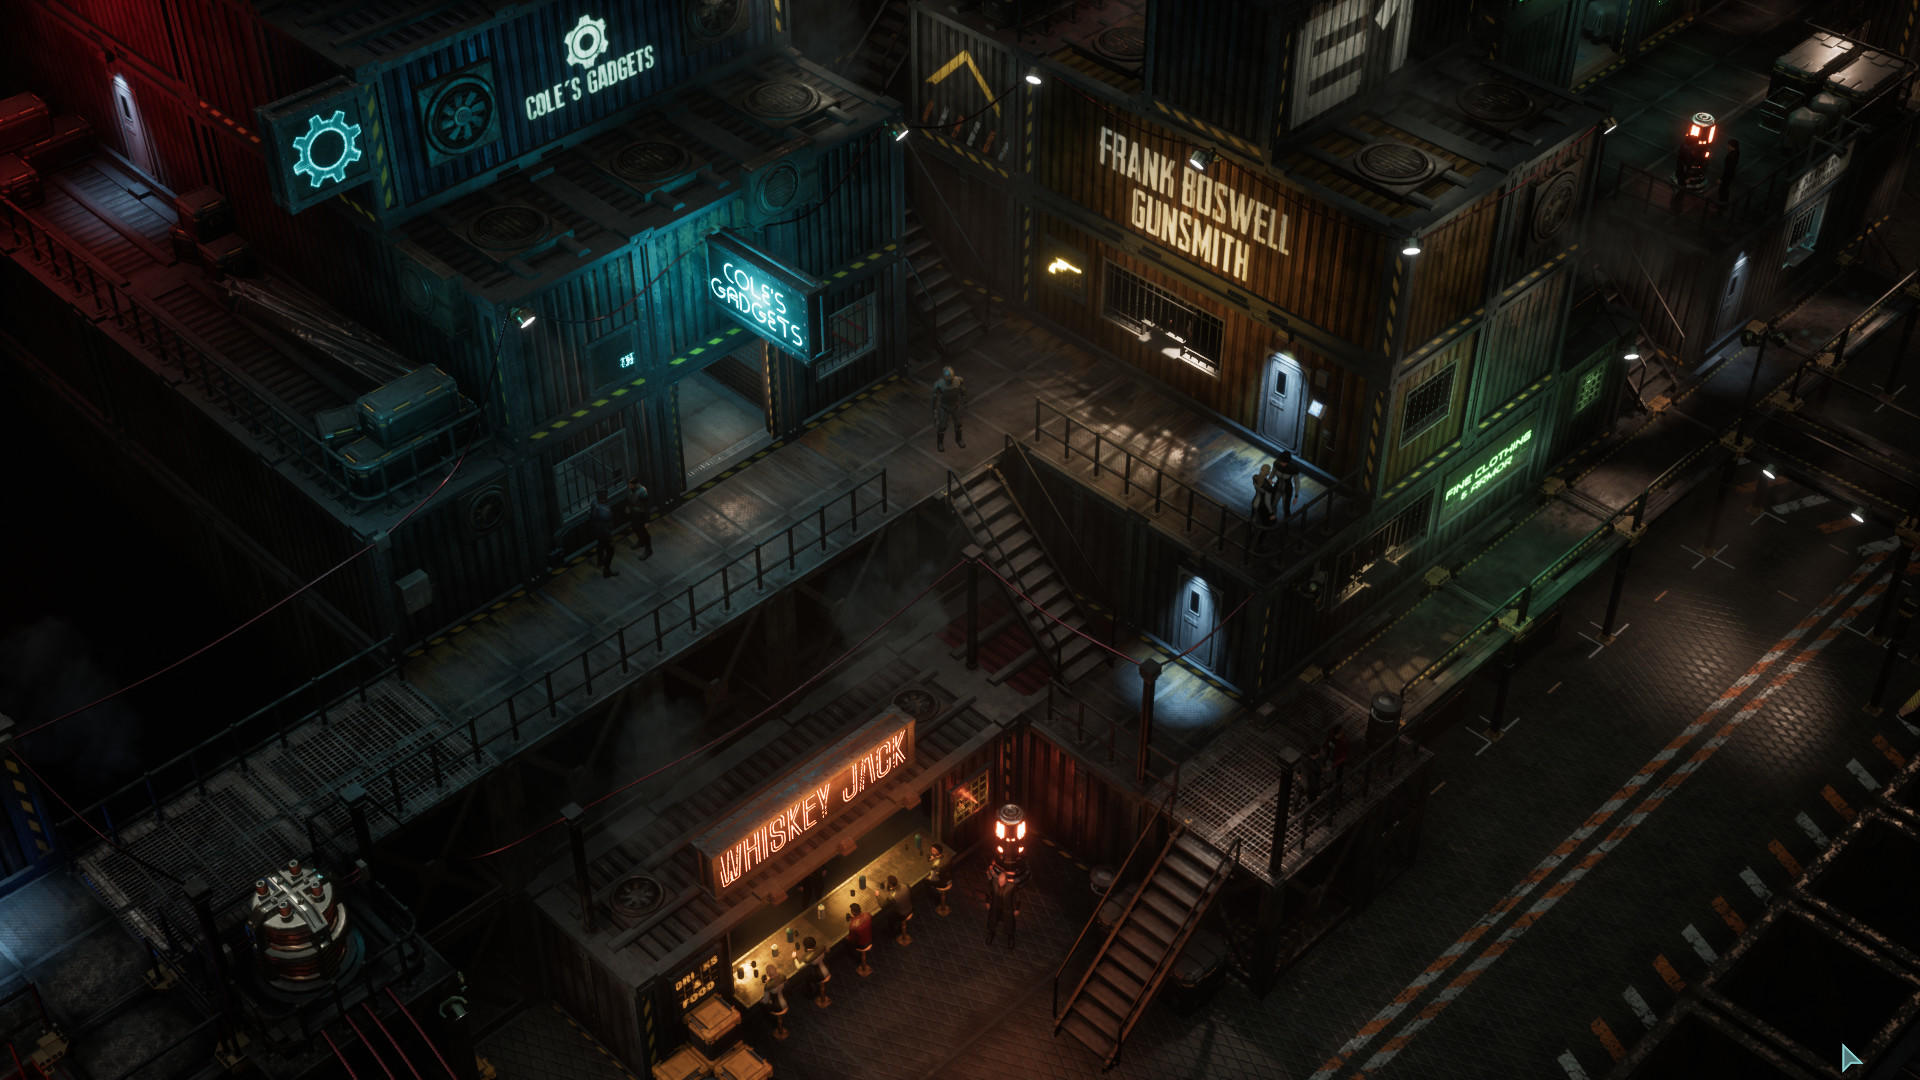 Screenshot 1 of Colony Ship: A Post-Earth Role Playing Game 